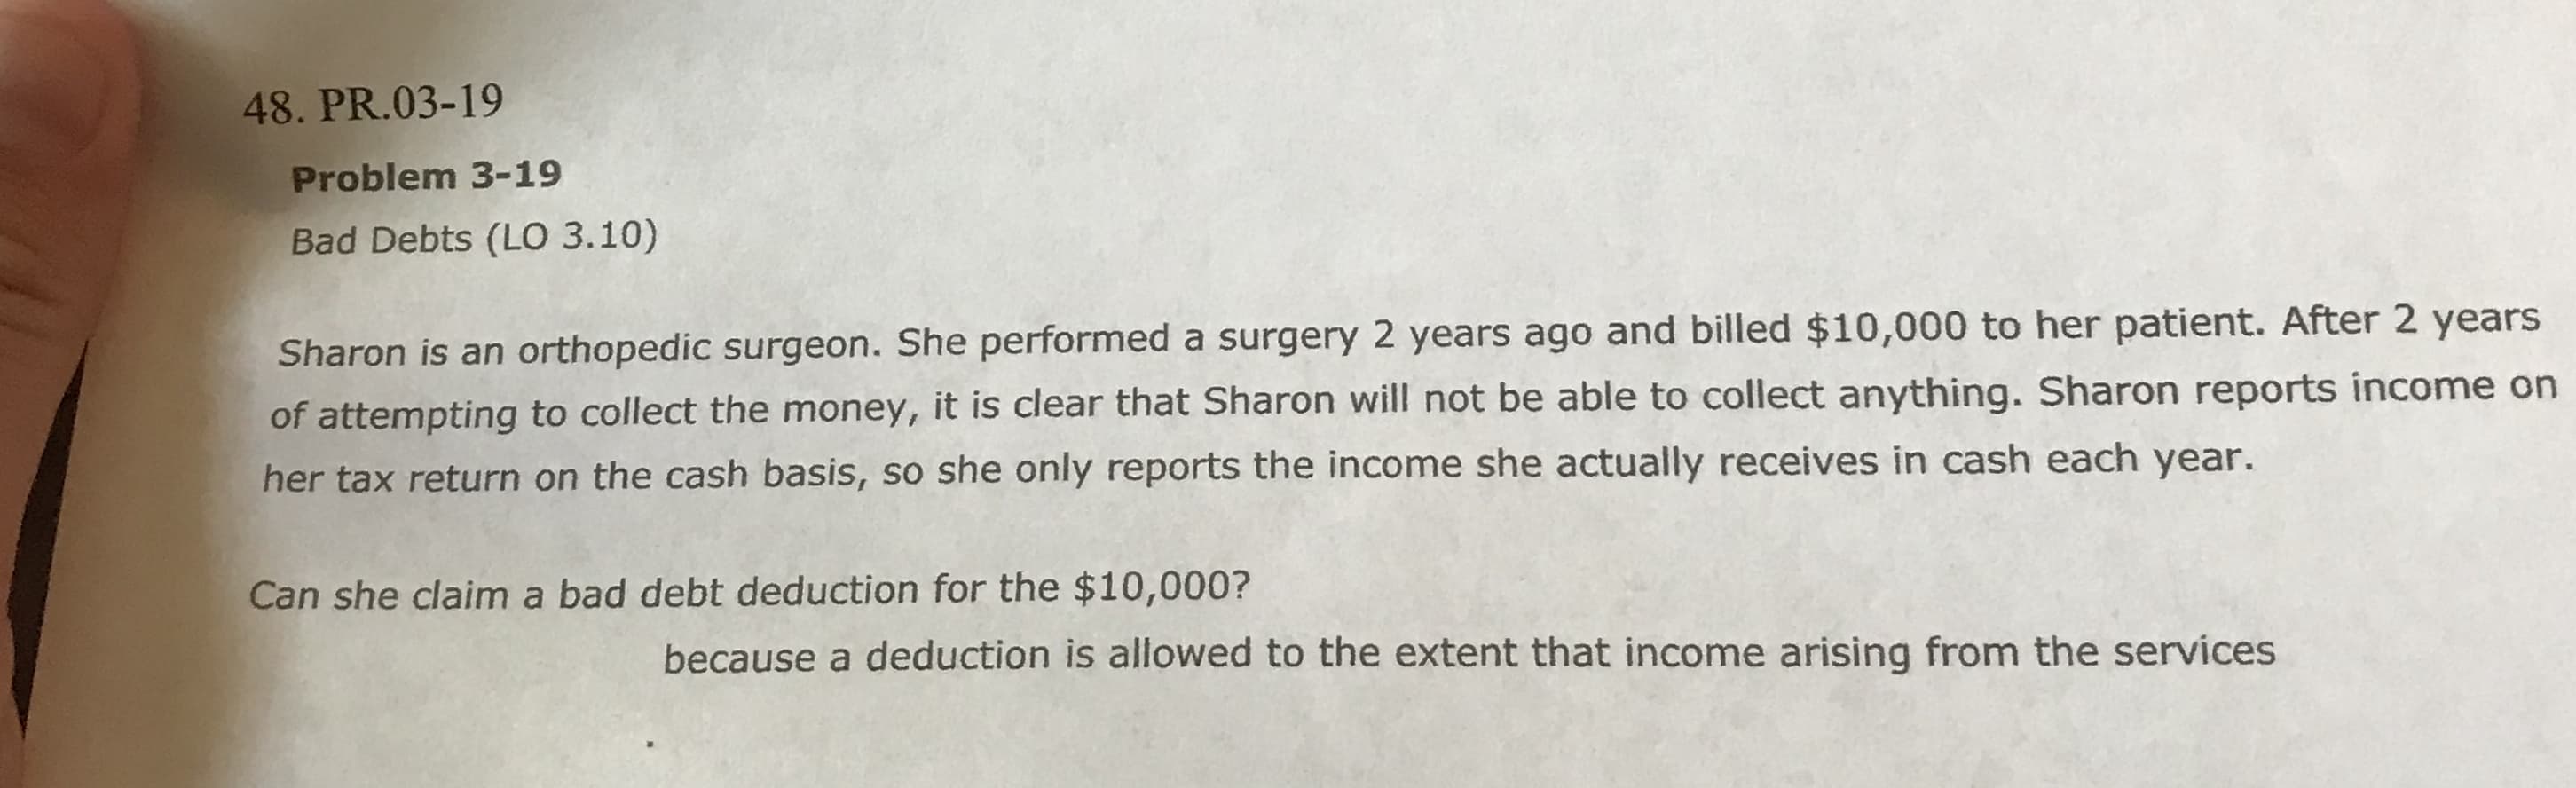 48. PR.03-19
Problem 3-19
Bad Debts (LO 3.10)
Sharon is an orthopedic surgeon. She performed a surgery 2 years ago and billed $10,000 to her patient. After 2 years
of attempting to collect the money, it is clear that Sharon will not be able to collect anything. Sharon reports income on
her tax return on the cash basis, so she only reports the income she actually receives in cash each year.
Can she claim a bad debt deduction for the $10,000?
because a deduction is allowed to the extent that income arising from the services
